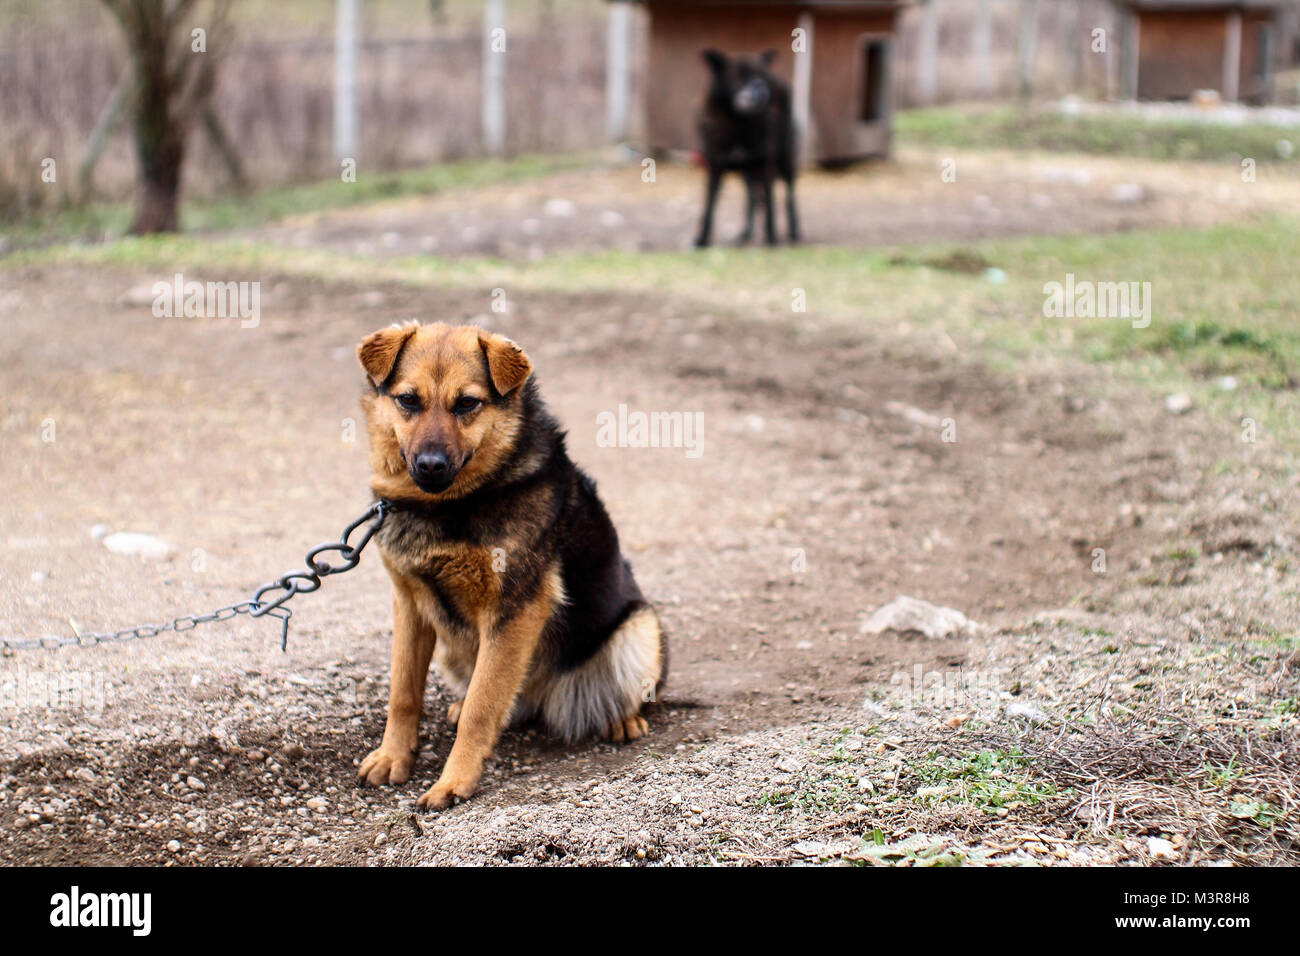 Sad dog on chain. Life in the animal shelter. Stock Photo